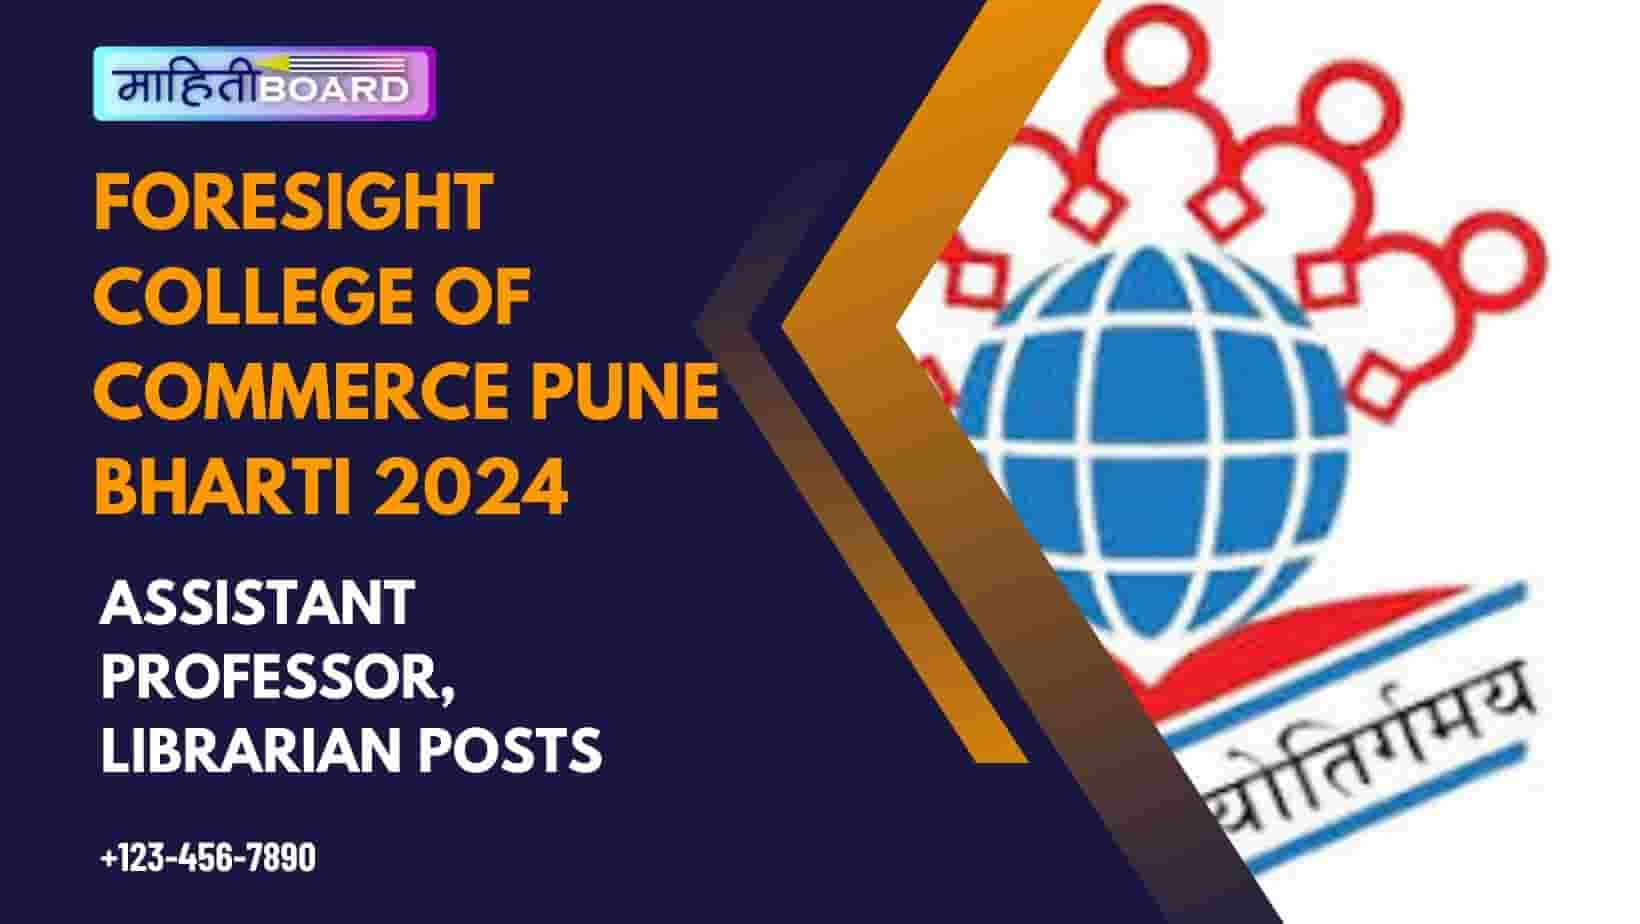 Foresight College of Commerce Pune Bharti 2024